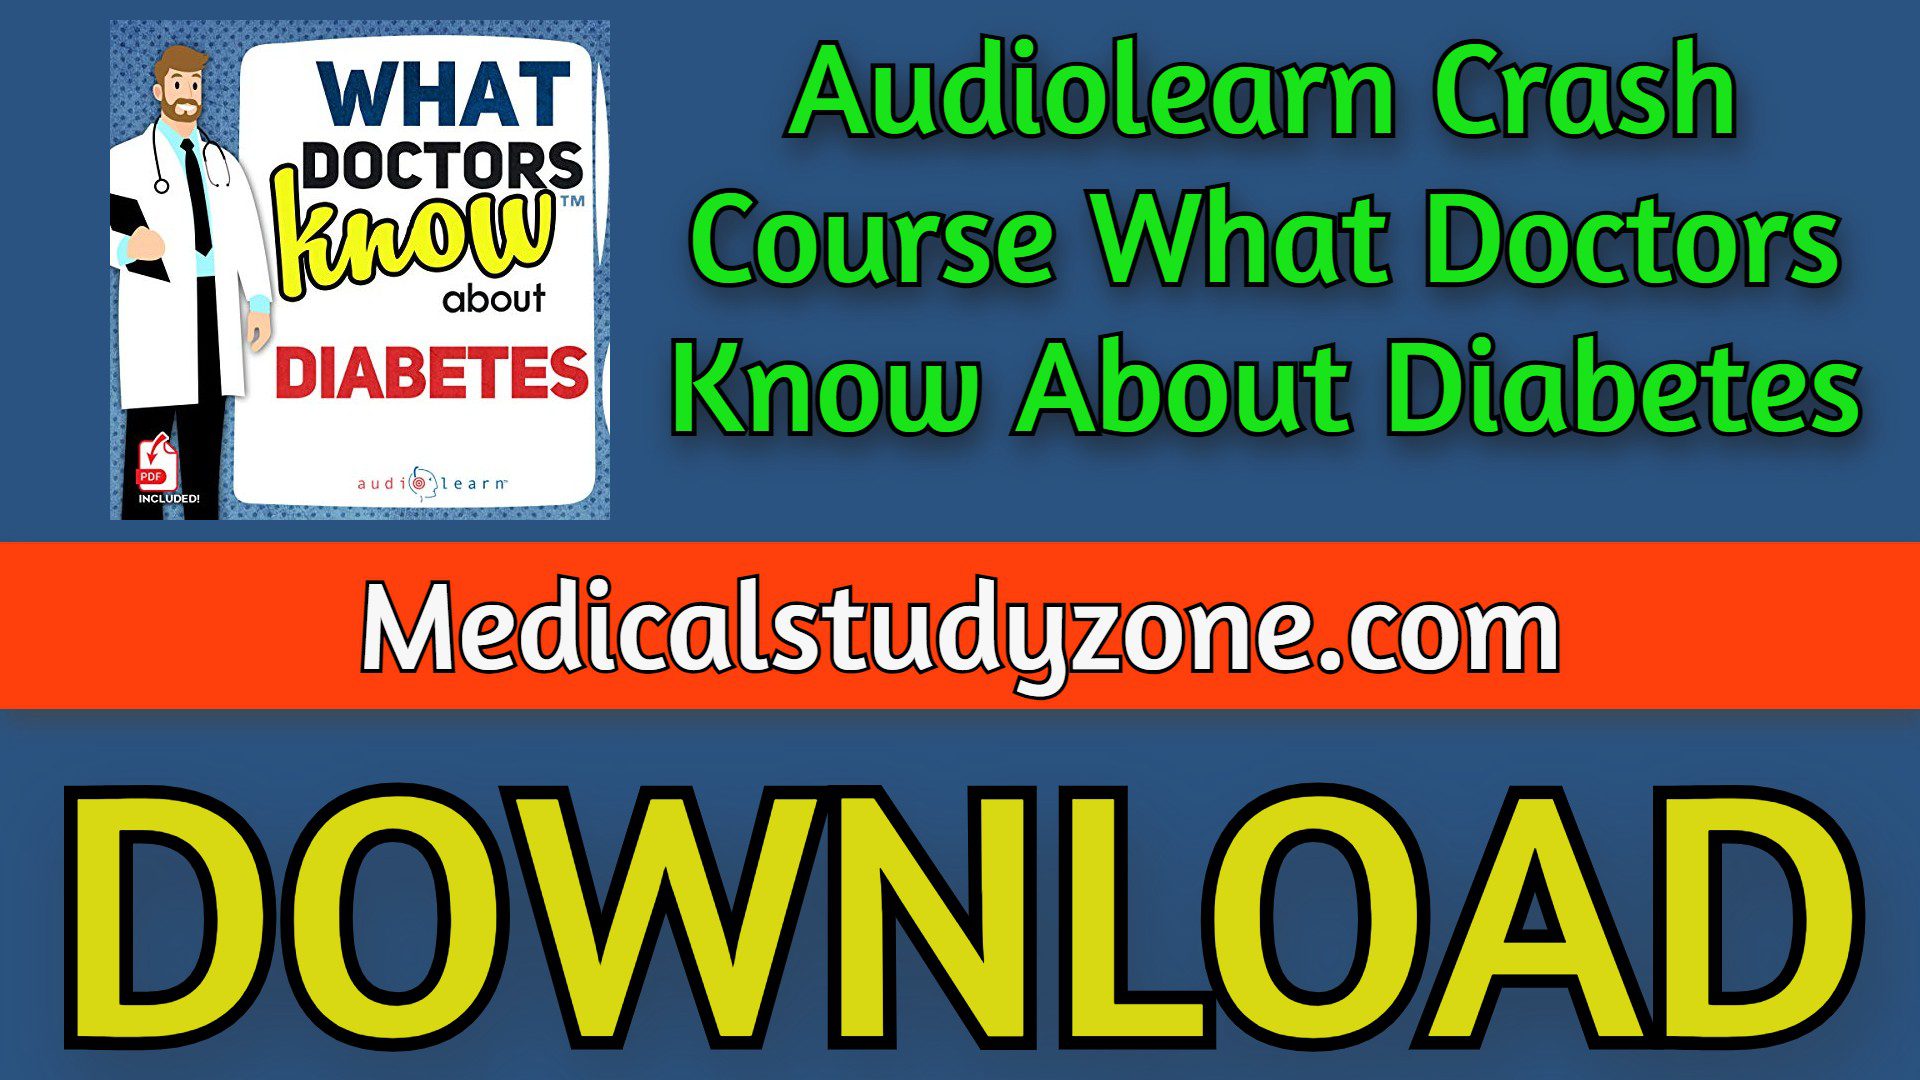 Audiolearn Crash Course What Doctors Know About Diabetes 2021 Free Download